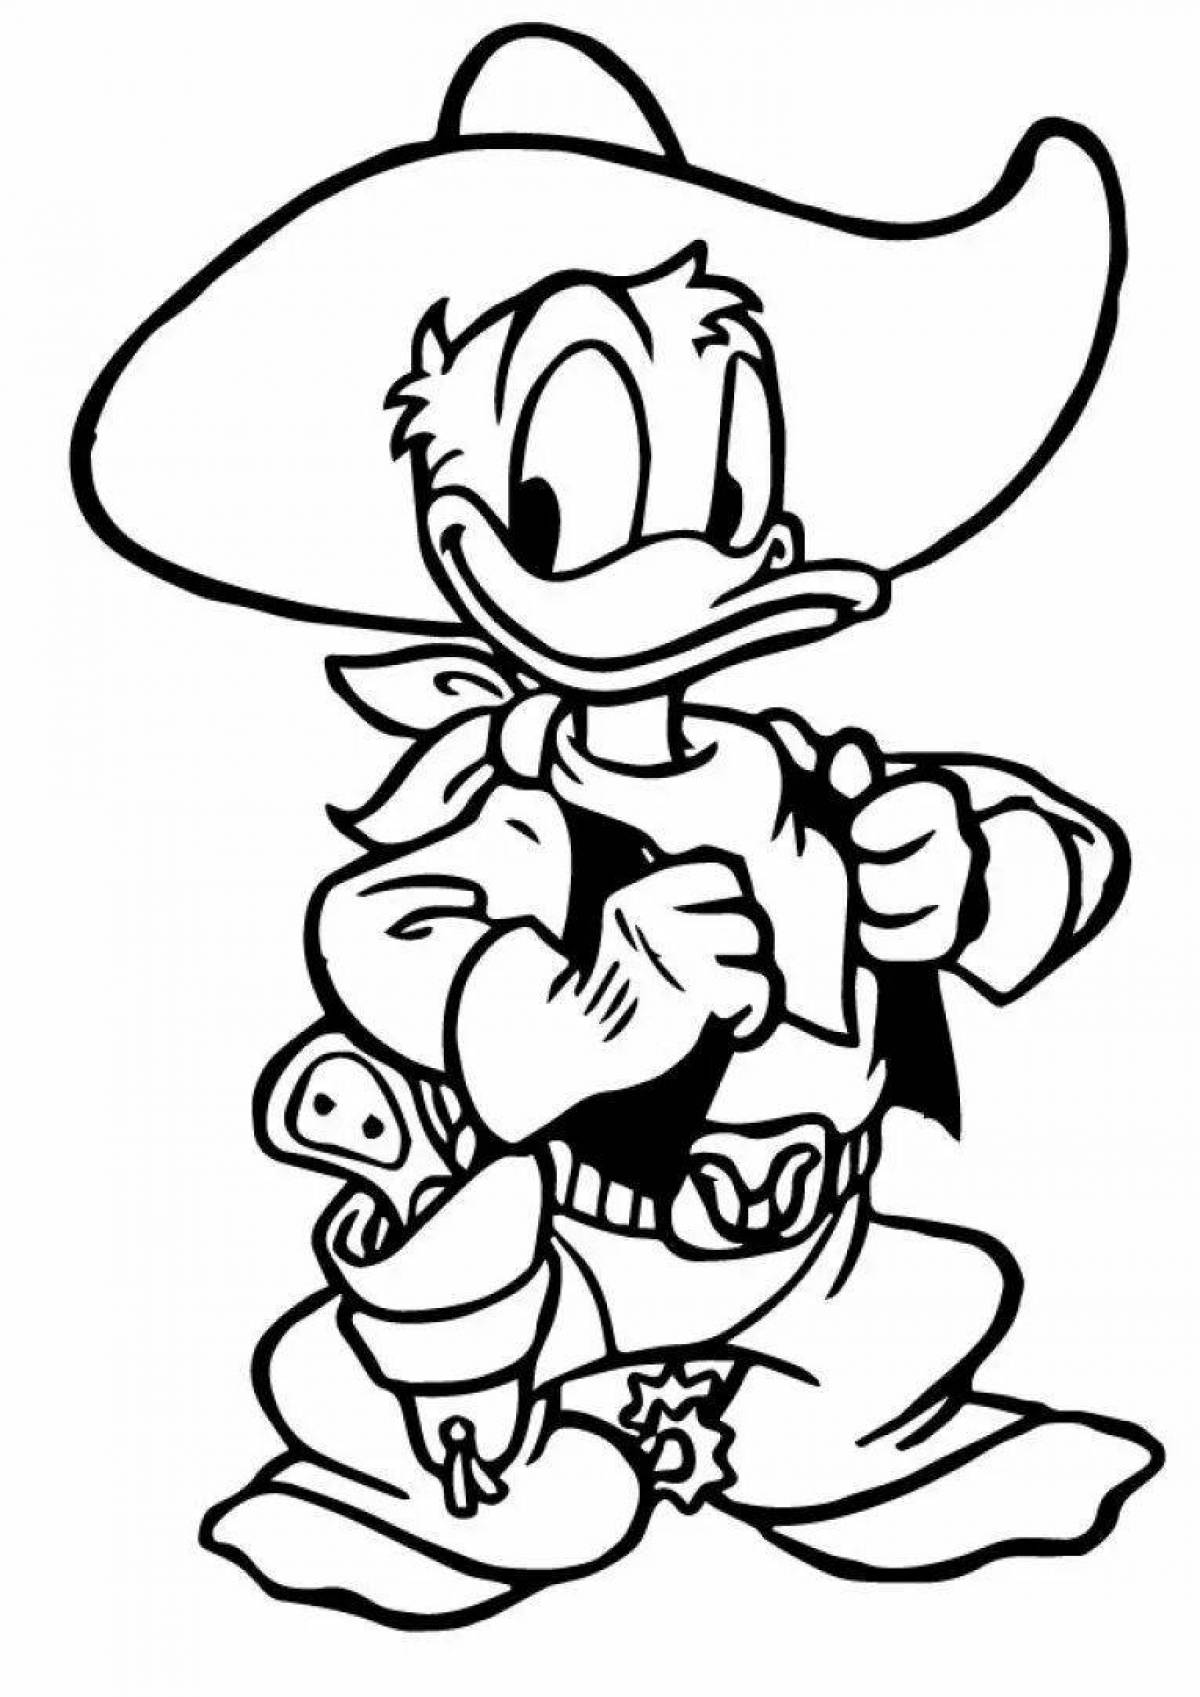 Scrooge McDuck coloring page with money